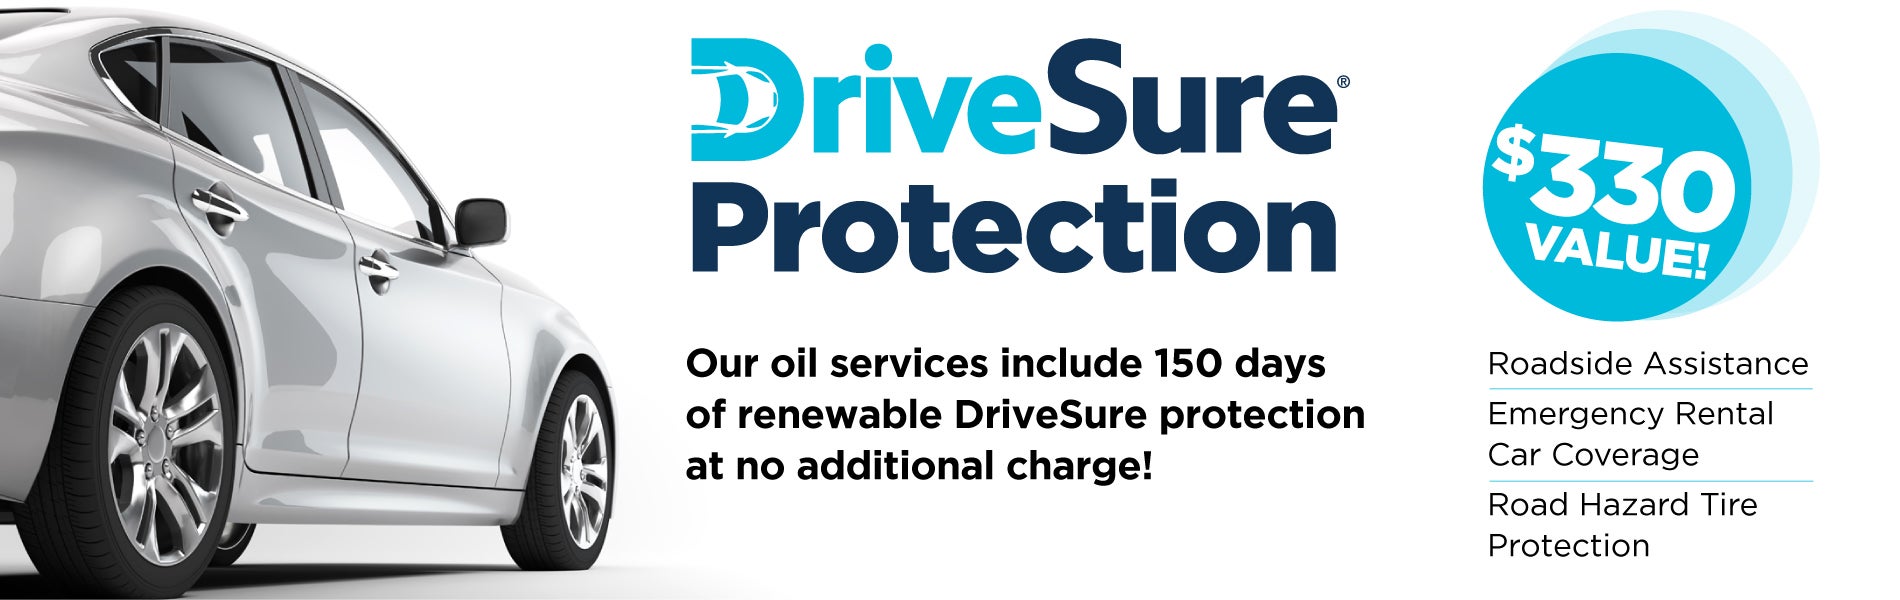 Century provides extra protection with Oil Change Service